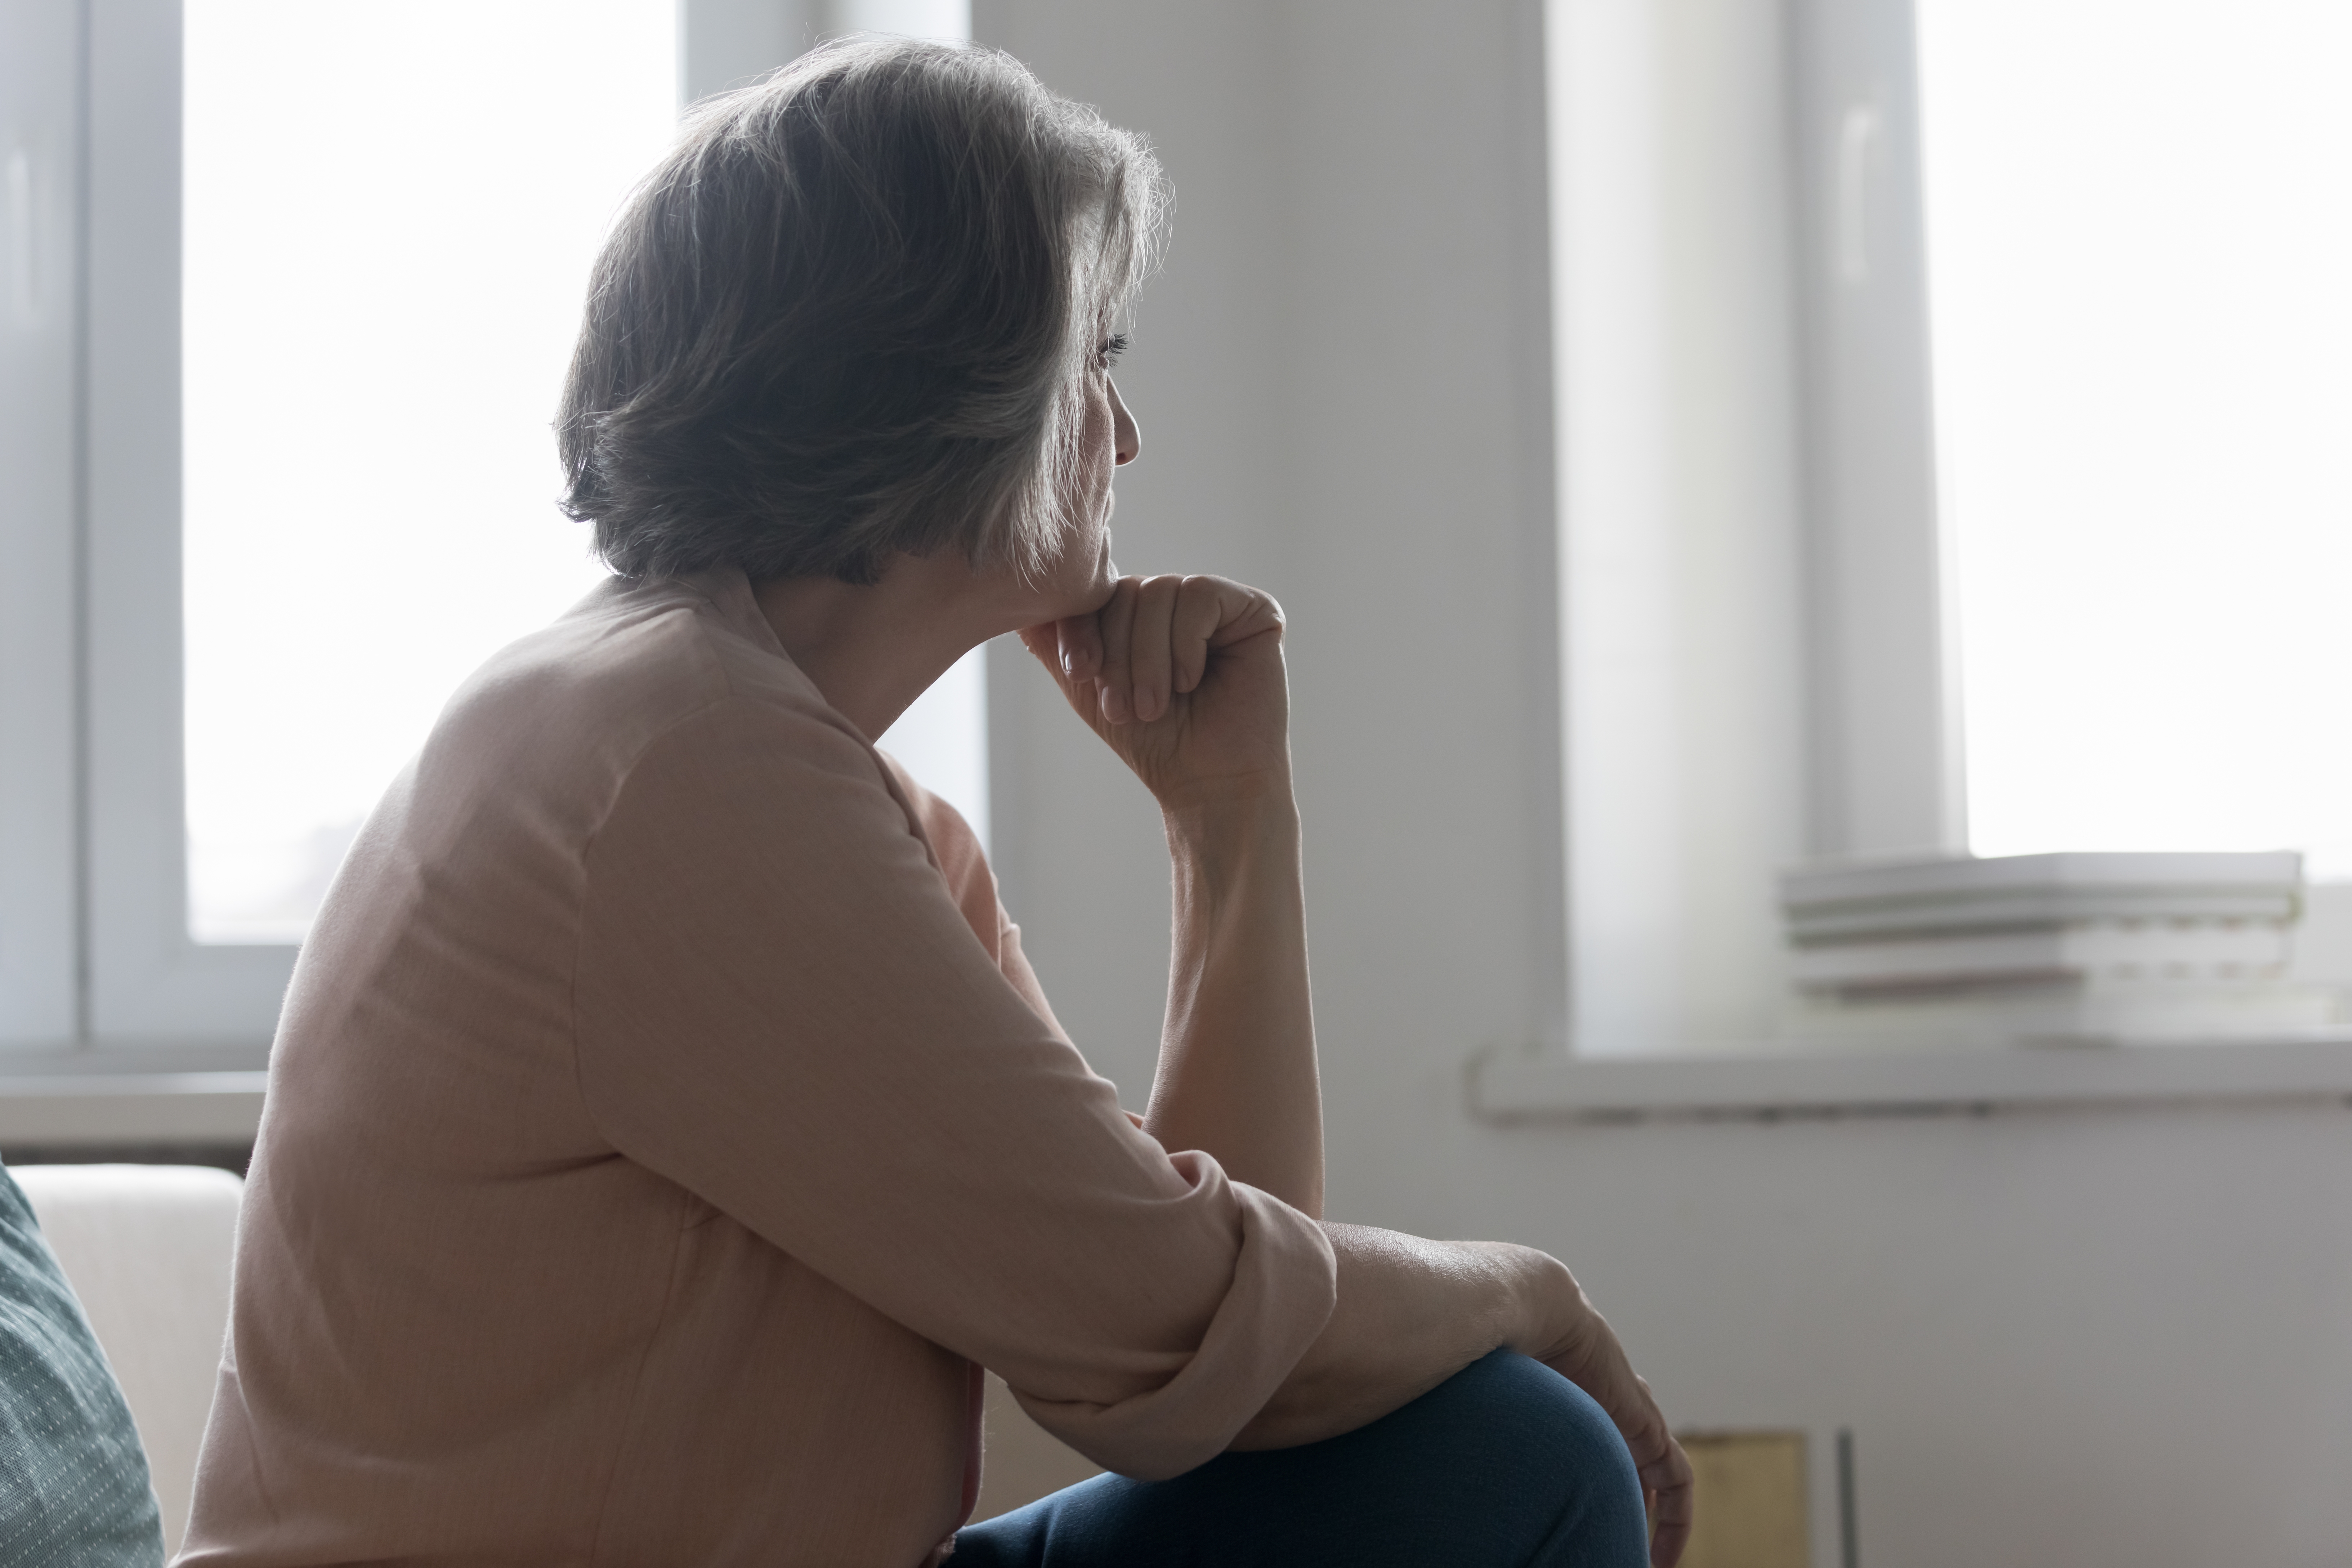 A senior woman wistfully stares at the window while missing someone | Source: Shutterstock